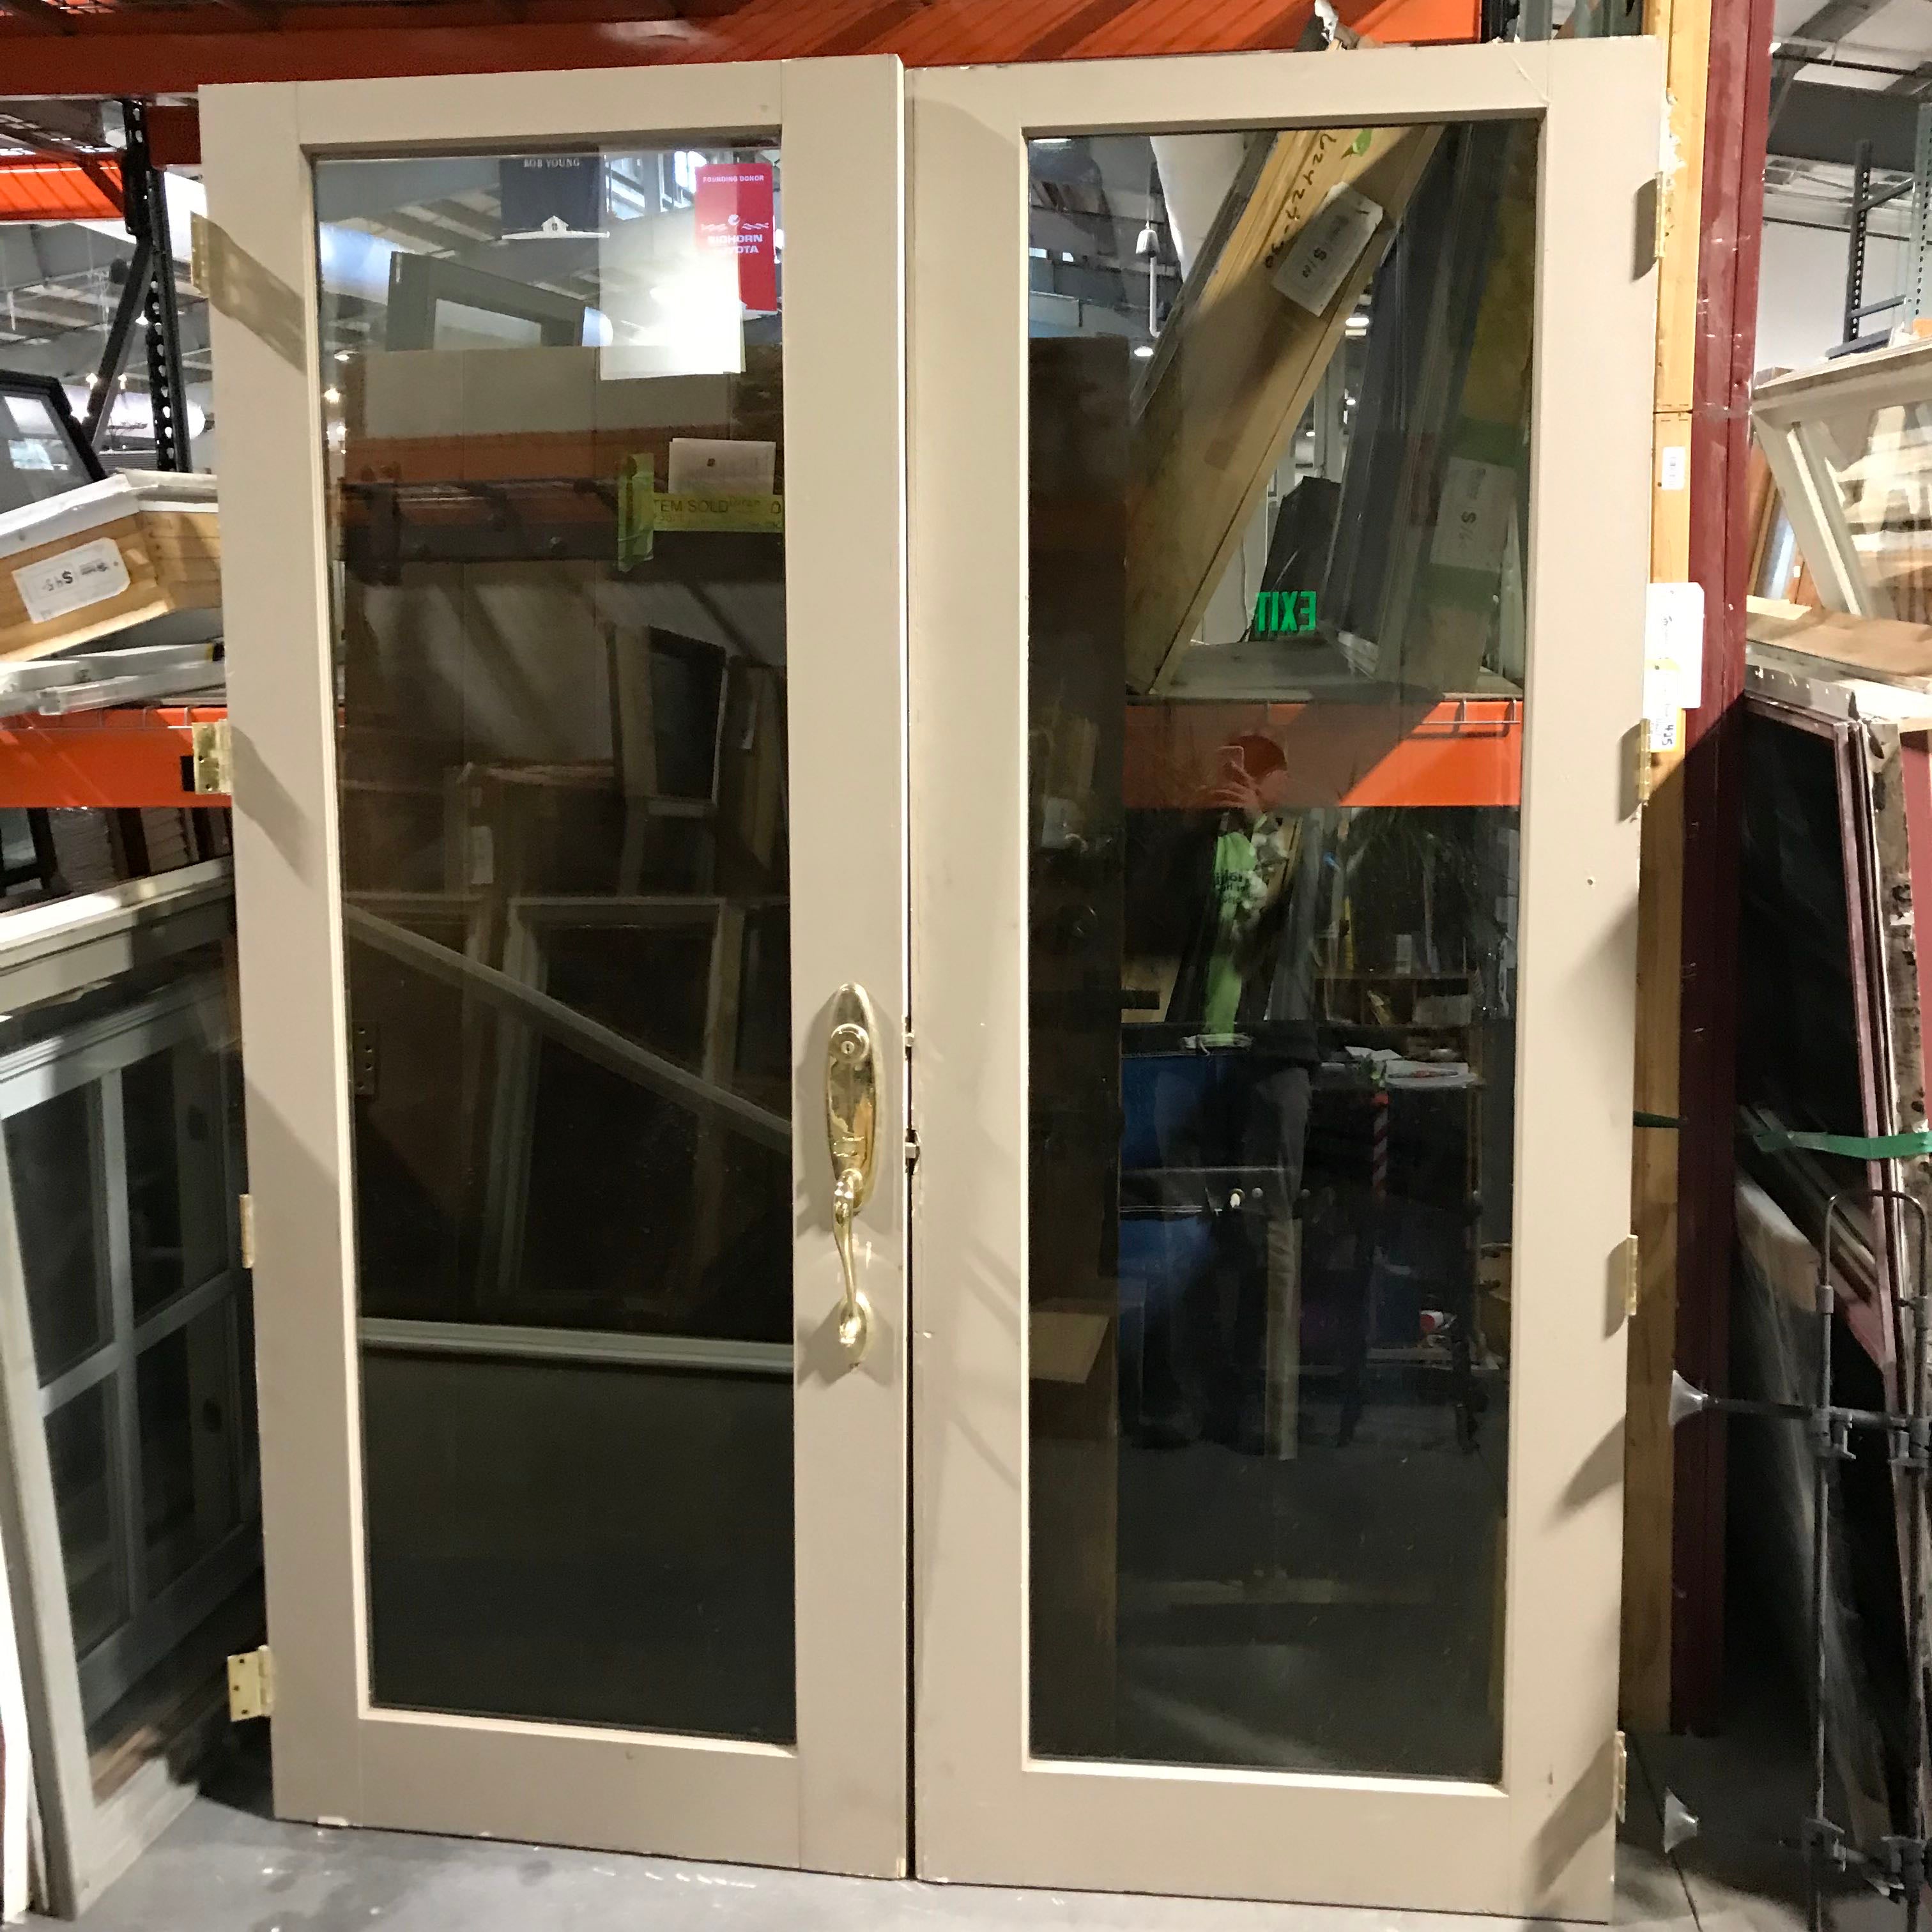 68.5"x 88.25"x 2" One Glass Panel Each Painted Grey White Solid Wood with Jamb Exterior French Doors